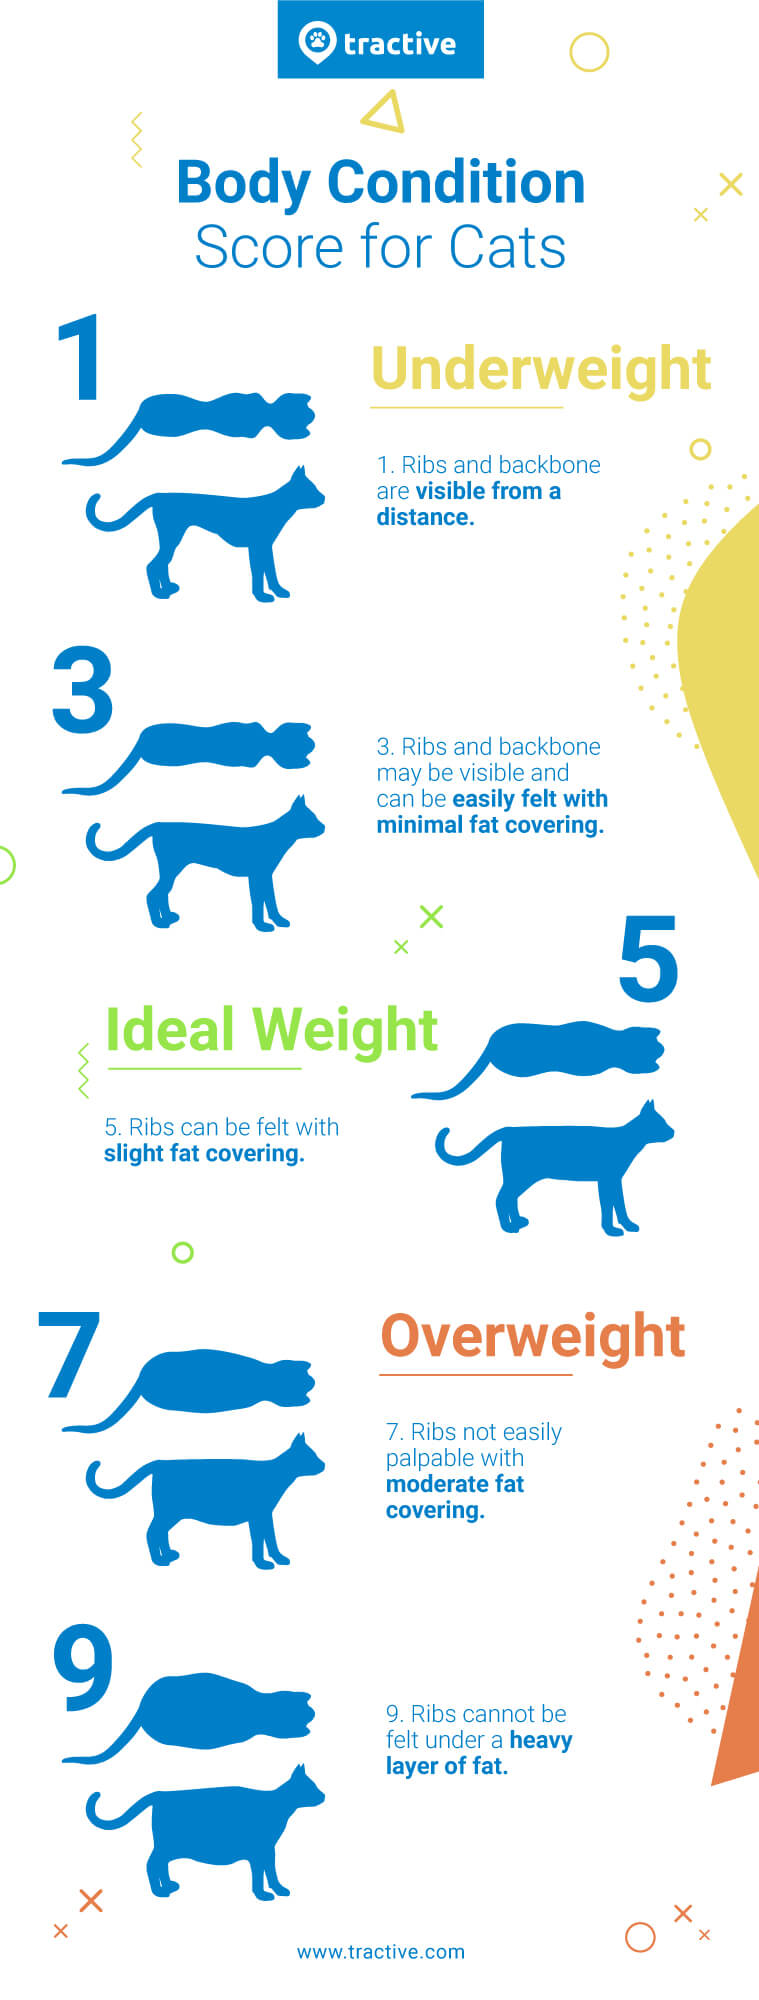 Cat Body Condition Score - Overweight Cats